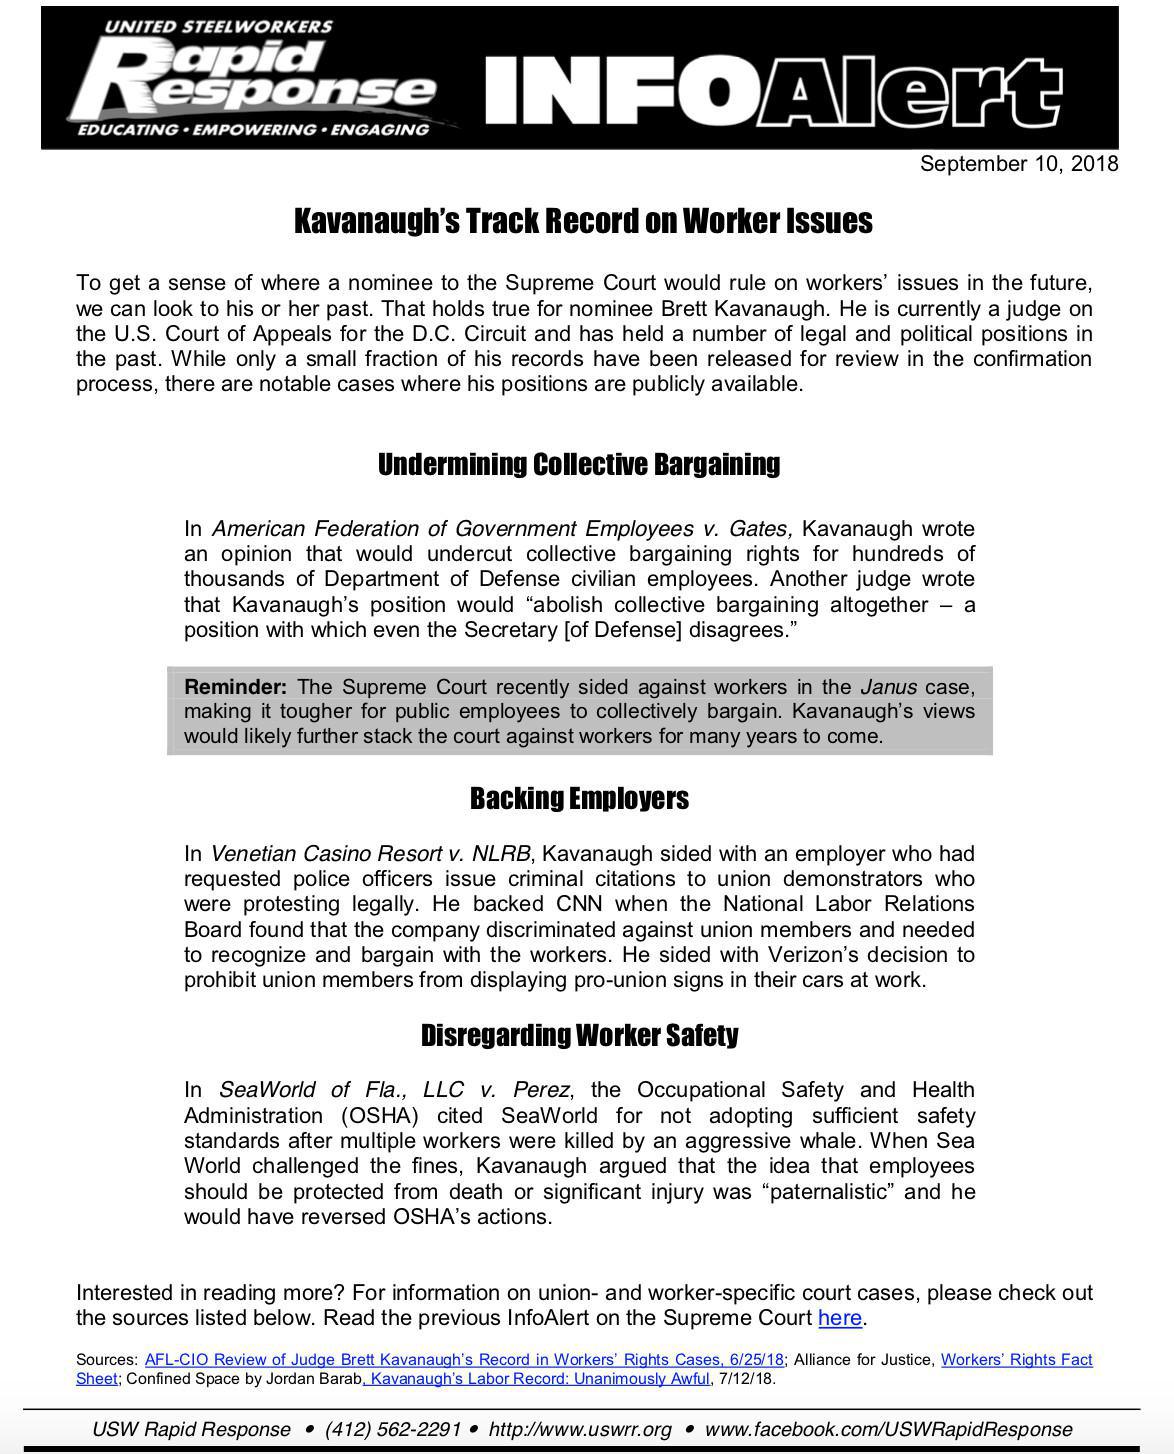  Hot off the presses. Kavanaugh's Track Record On Worker Issues.